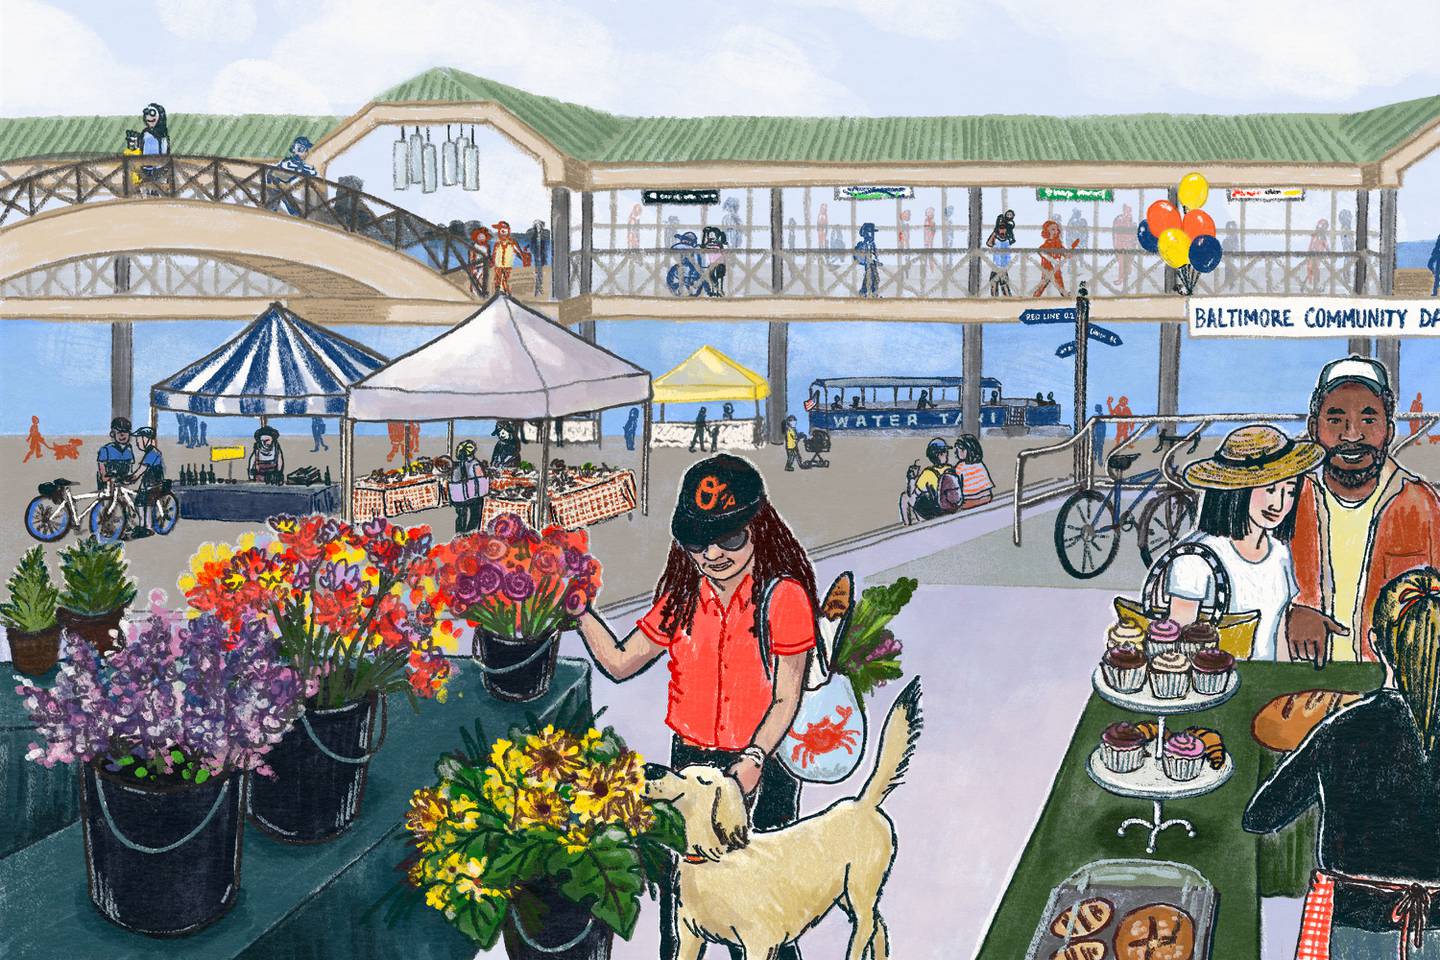 A colorful hand drawn illustration shows Harborplace as imagined by a reader. There's an elevated walkway, a flower stand, water views and a bake shop.